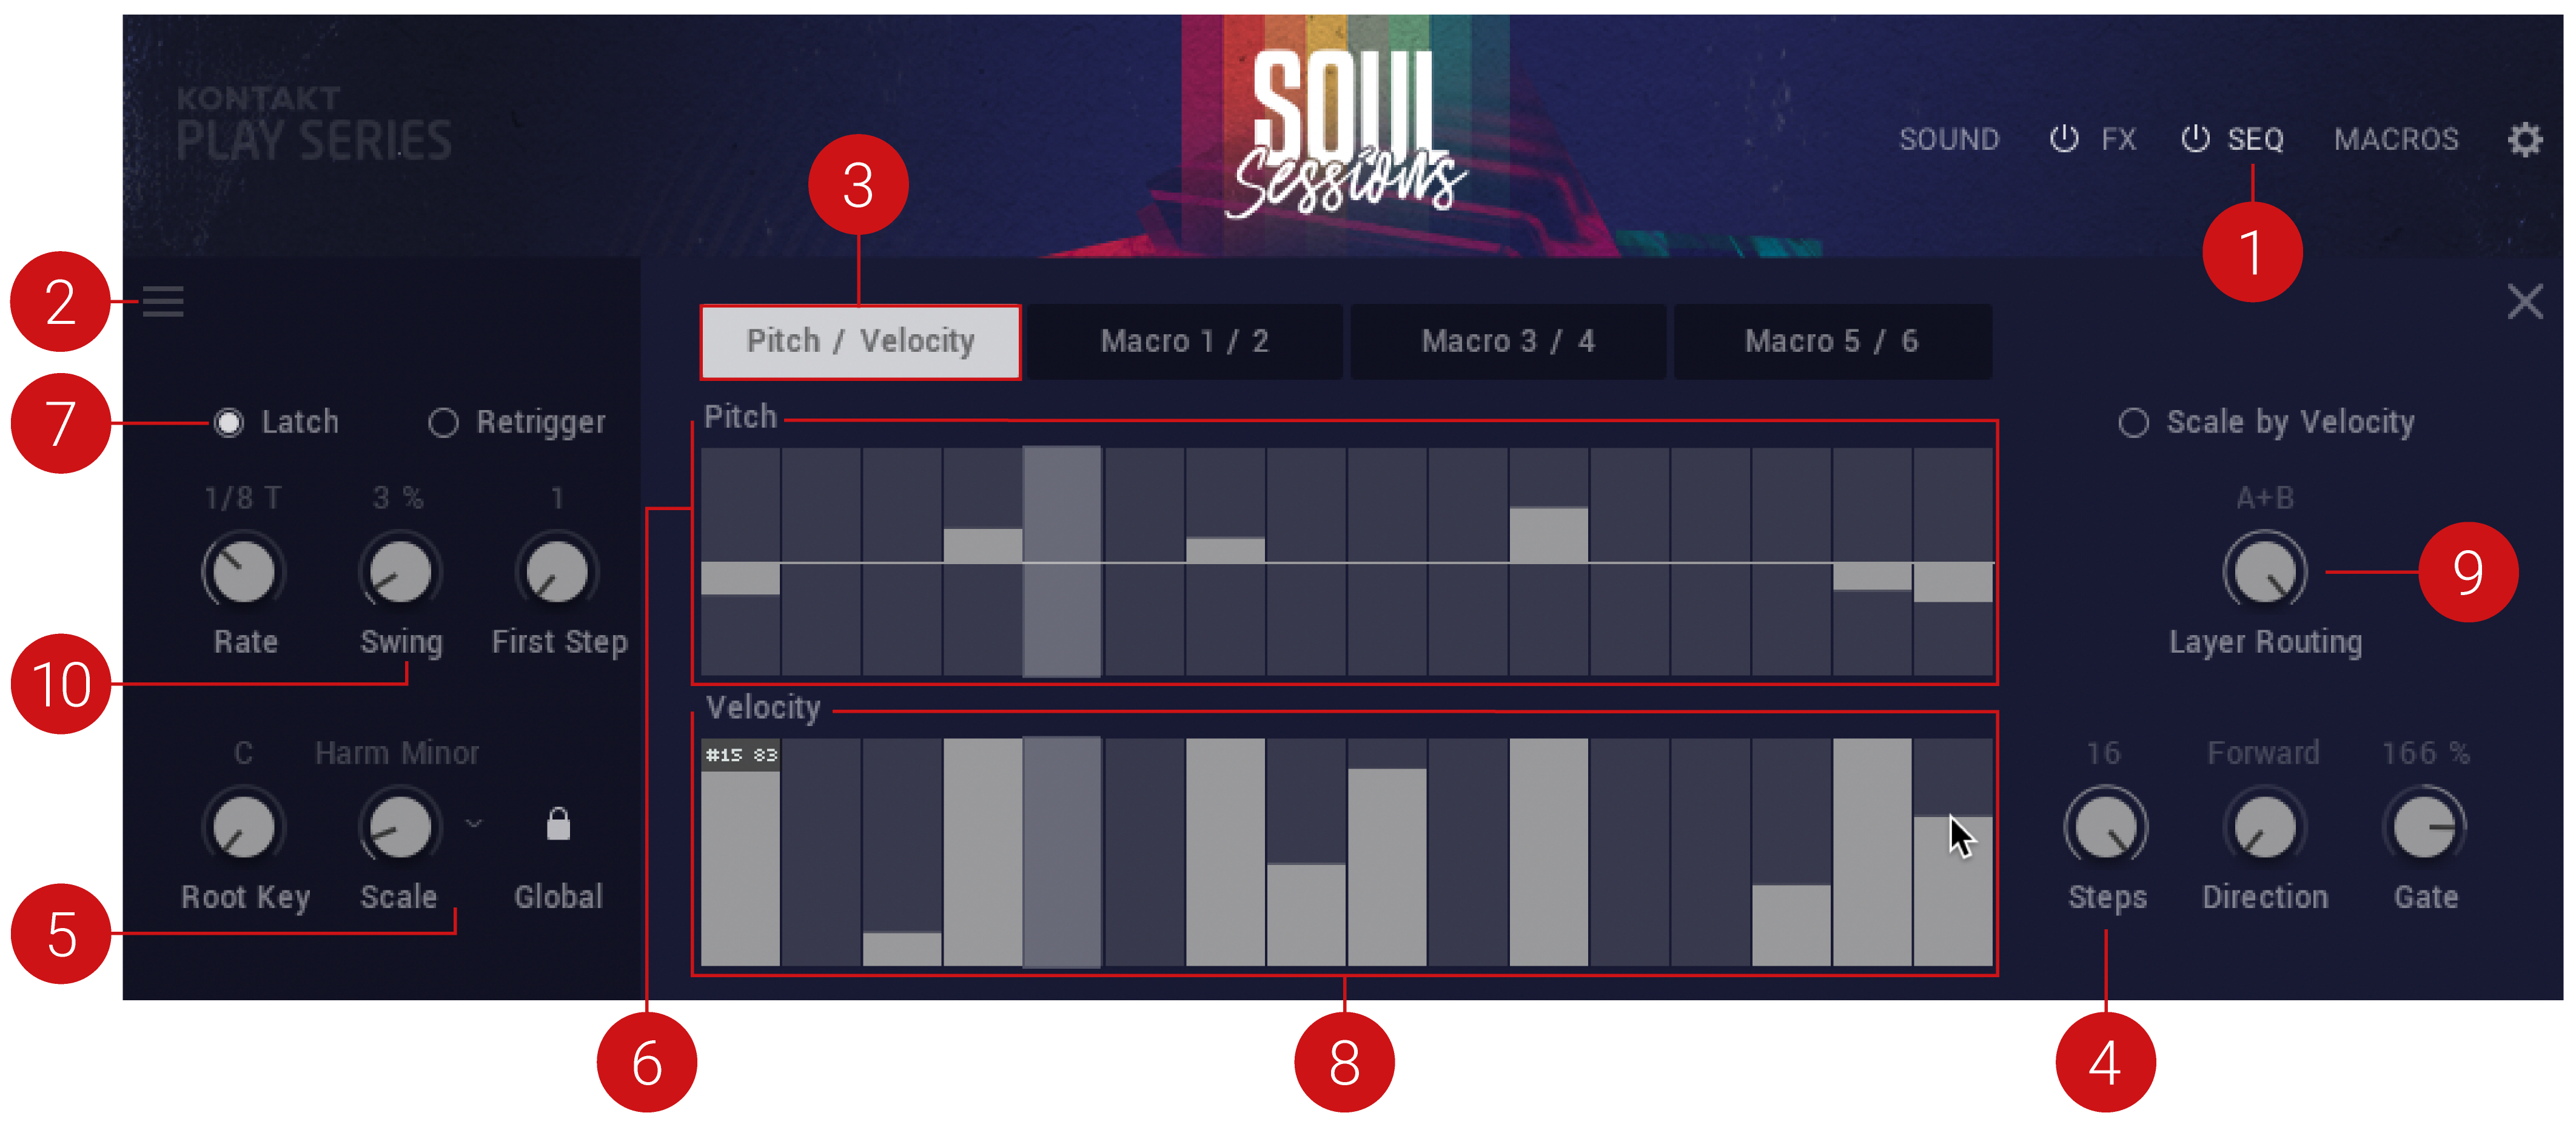 Soul_Sessions_Sequencing_Pitch.png